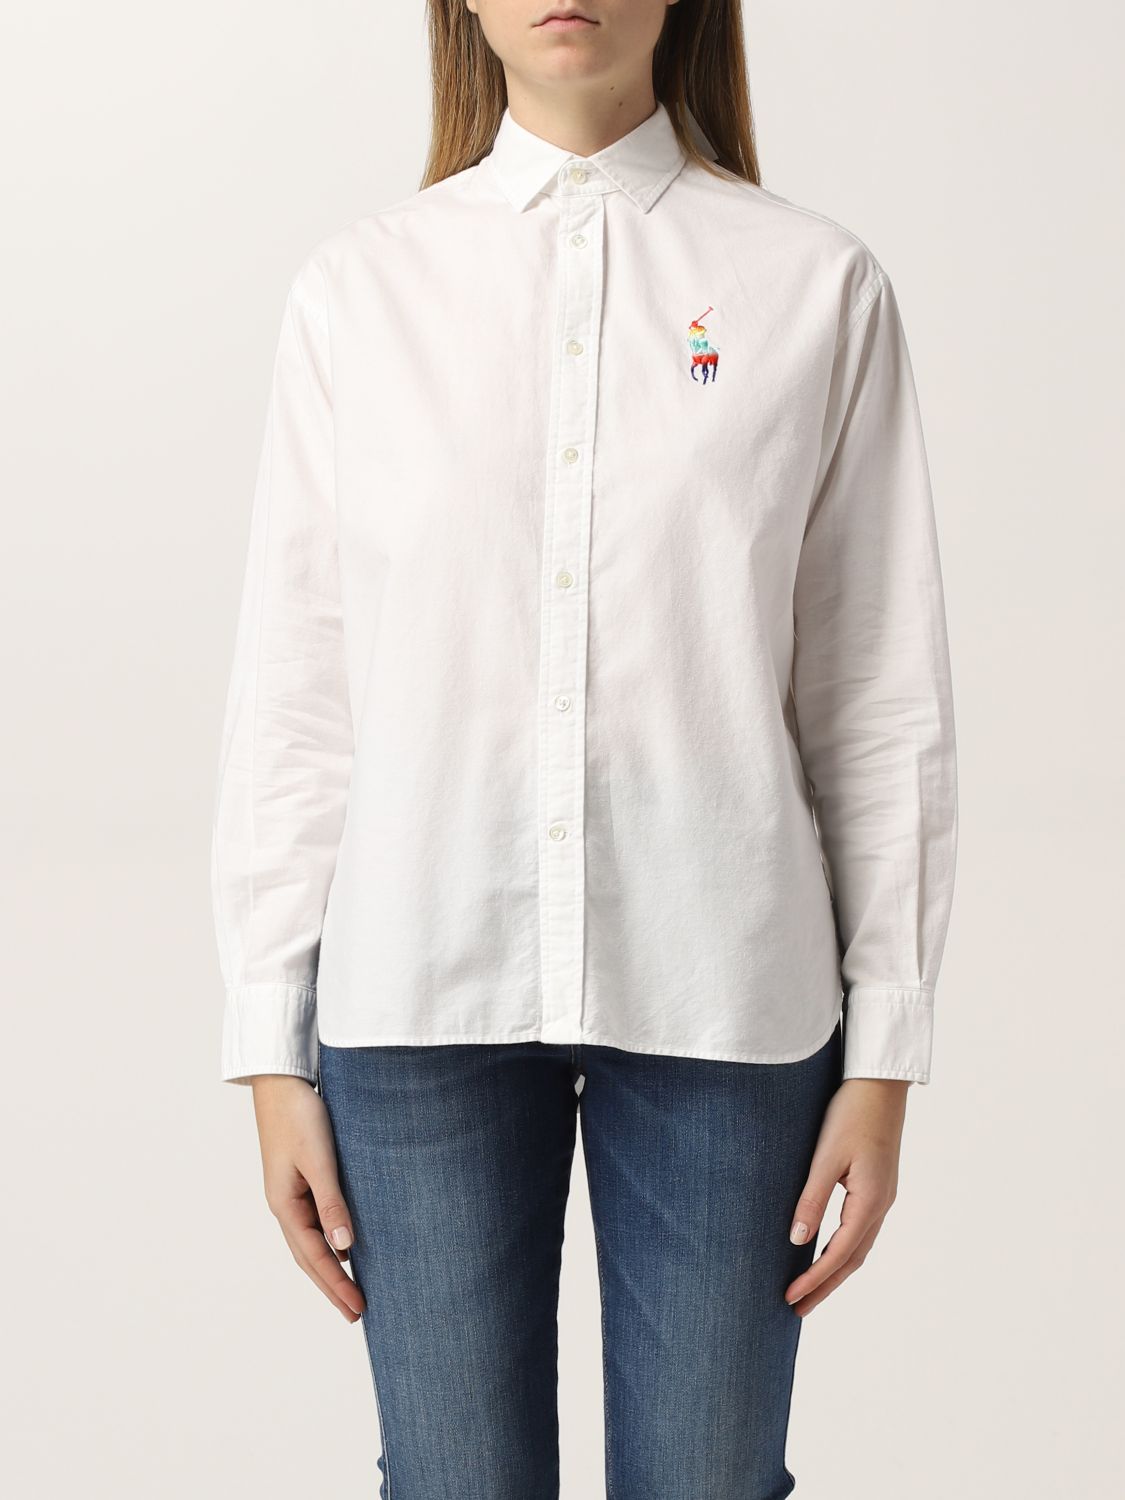 Polo Ralph Lauren shirt with multicolor embroidered logo